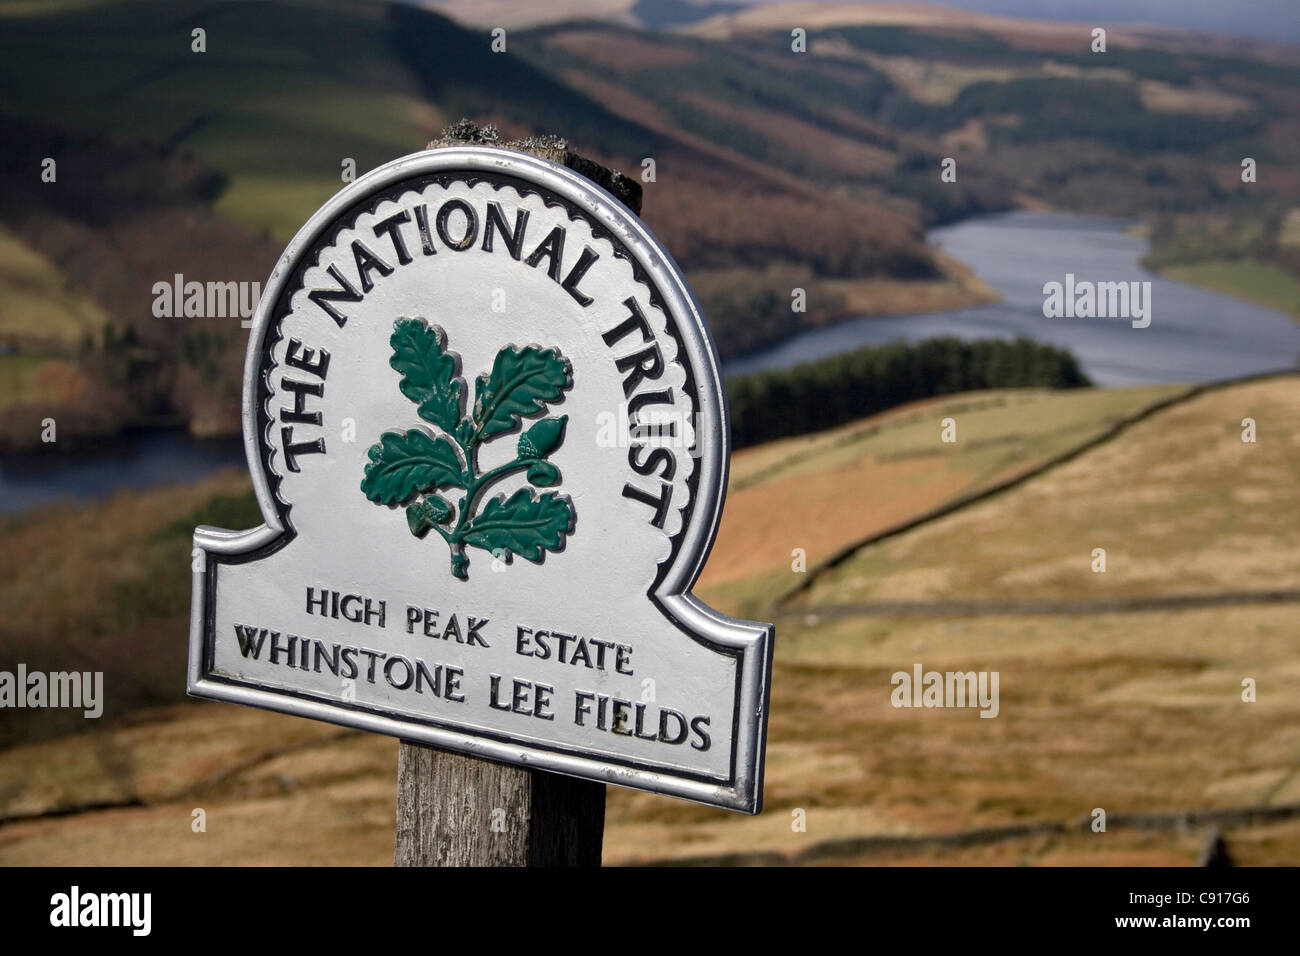 There are National Trust trails in the Peak District National Park overlooking the Ladybower Dam from the High Peak Estate at Stock Photo